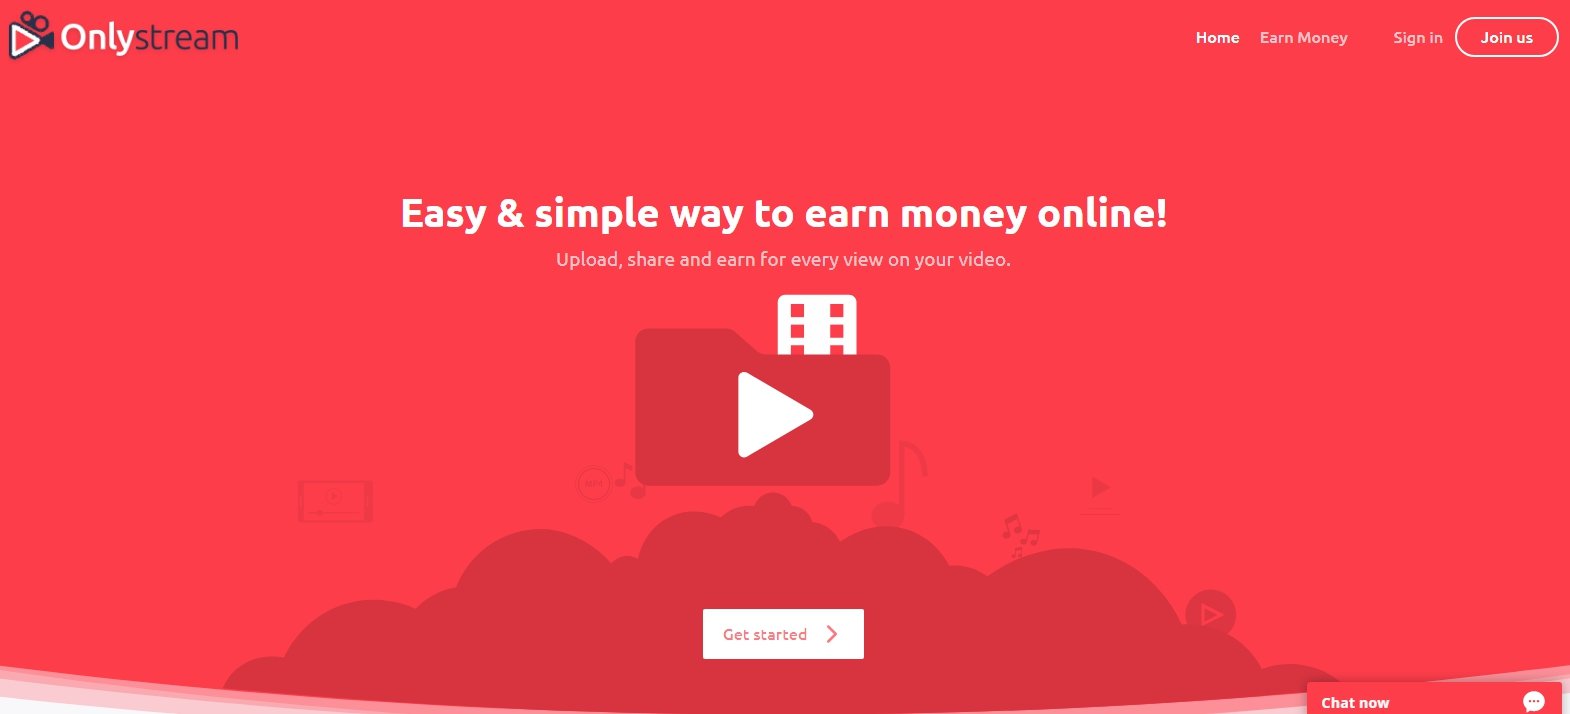 Onlystream.tv overview and affiliate program overview